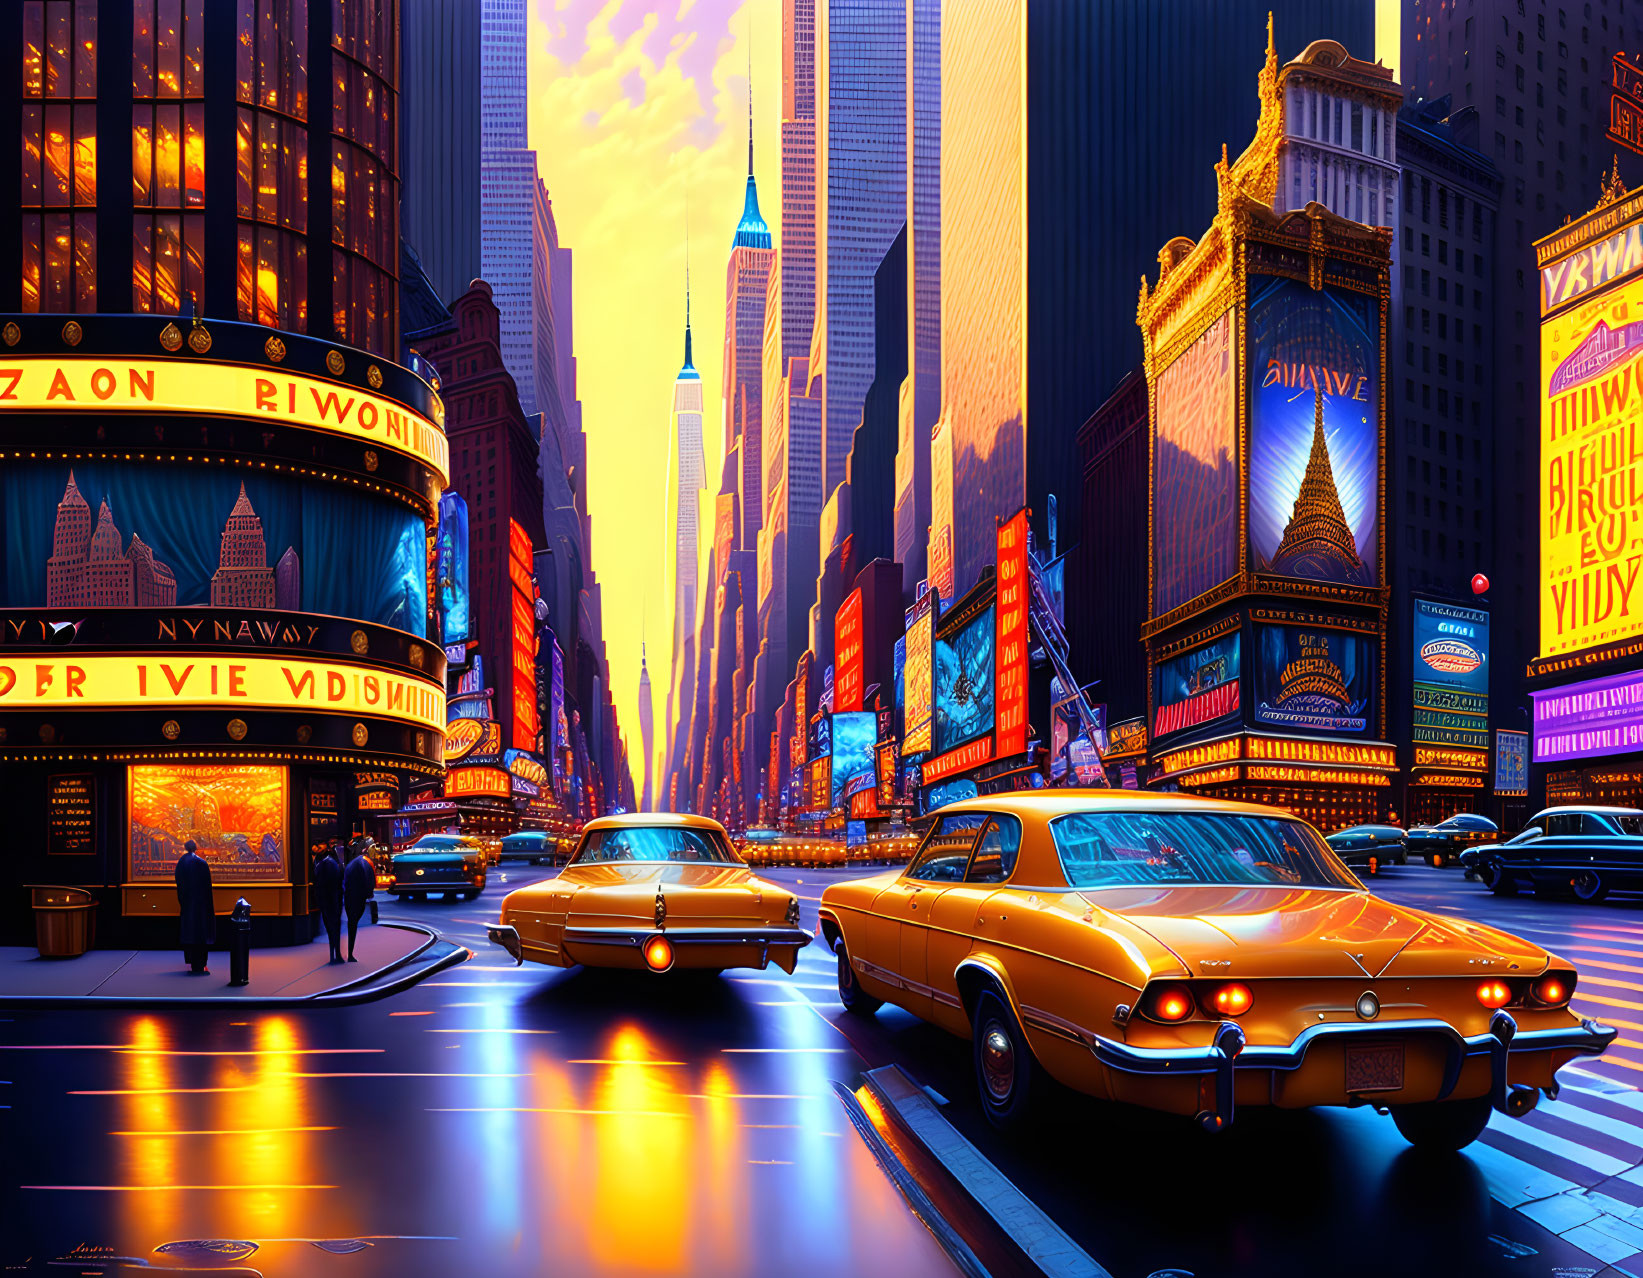 City street at sunset with glowing billboards, vintage cars, and wet asphalt in downtown scenario